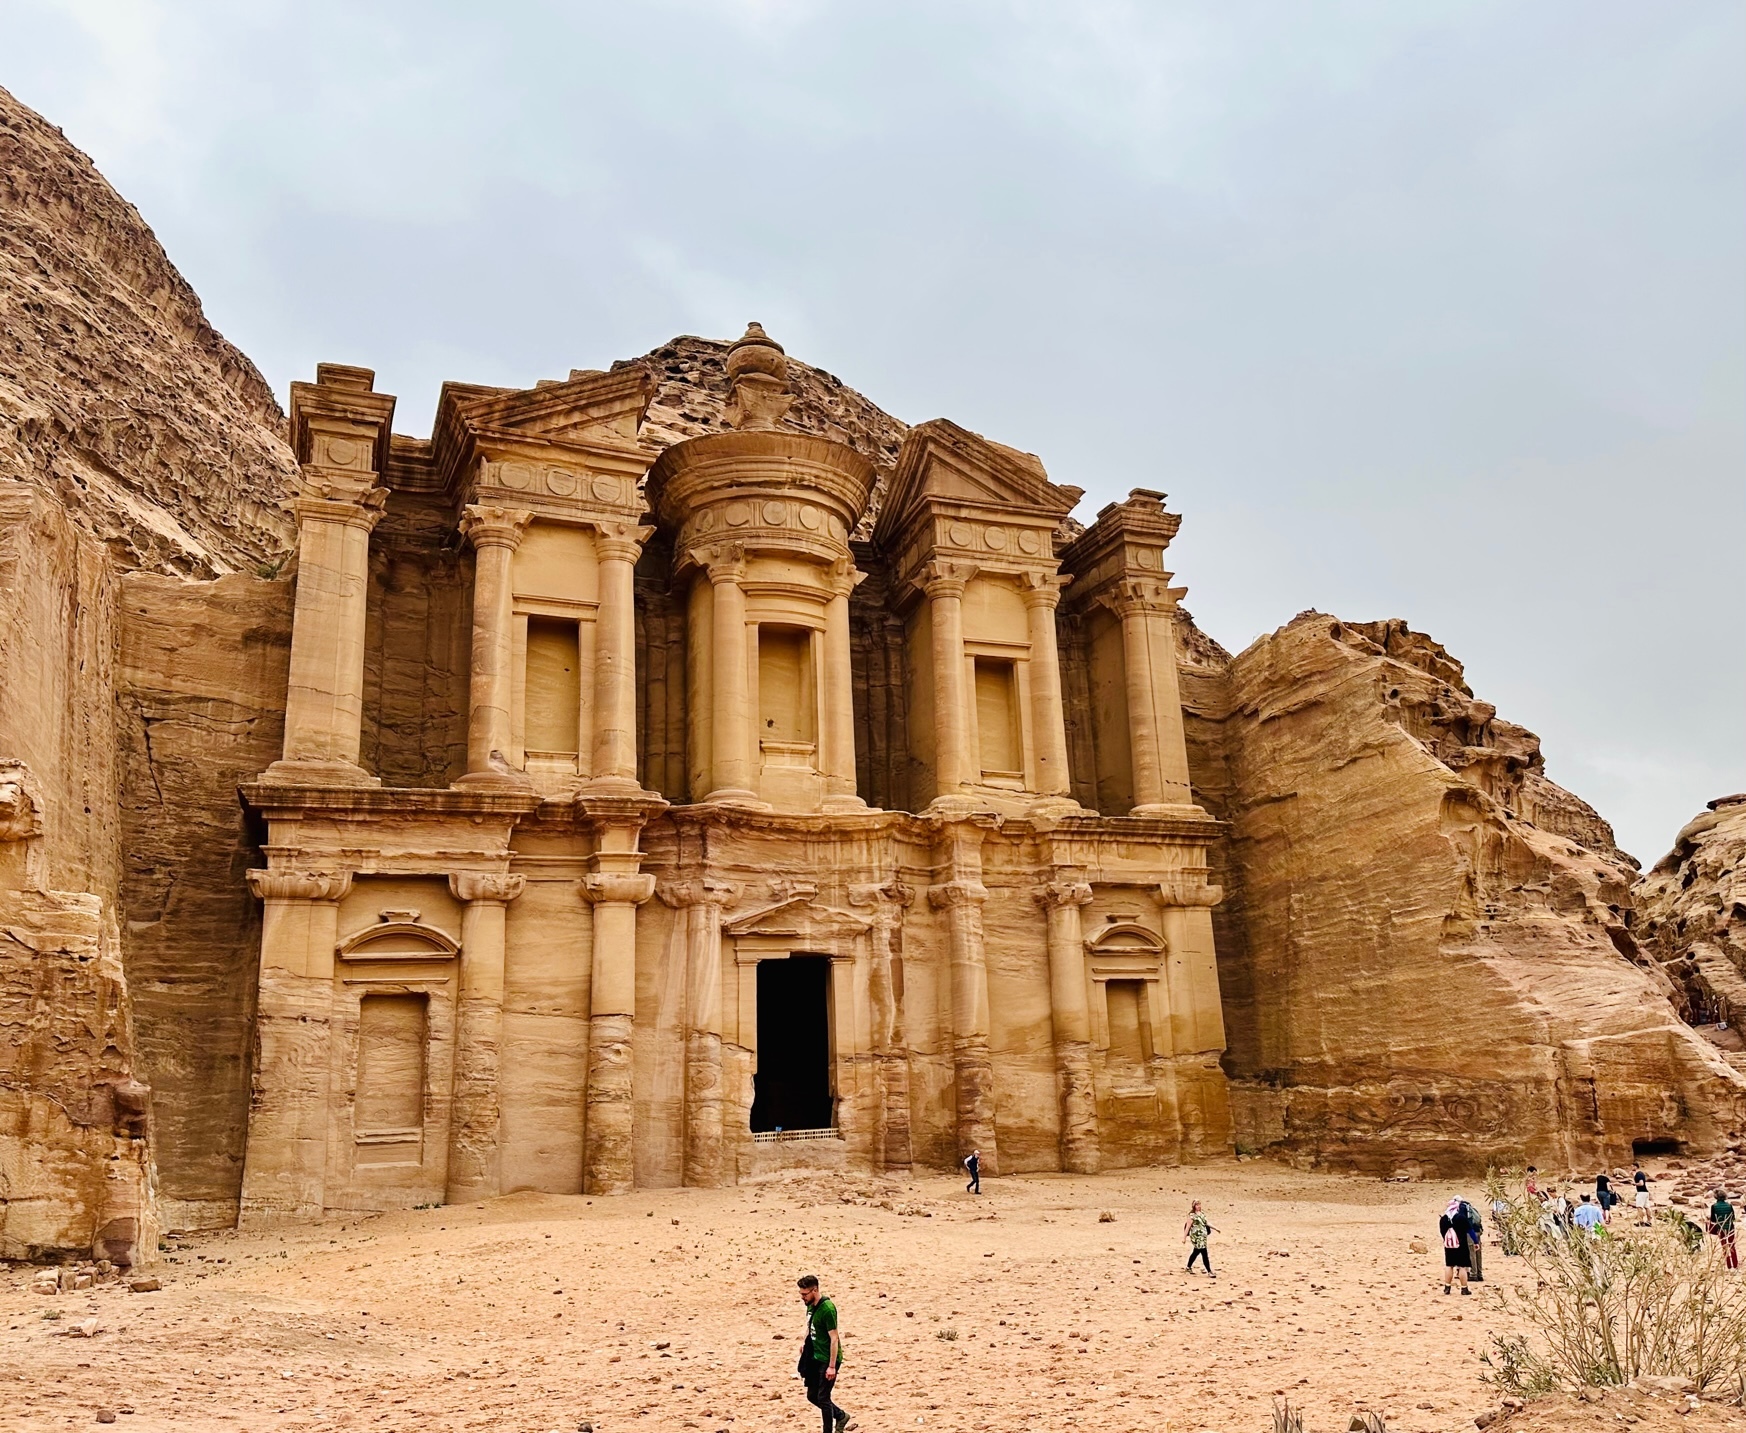 The Monastery, one of the jewels of the archaeological site of Petra, in Jordan.